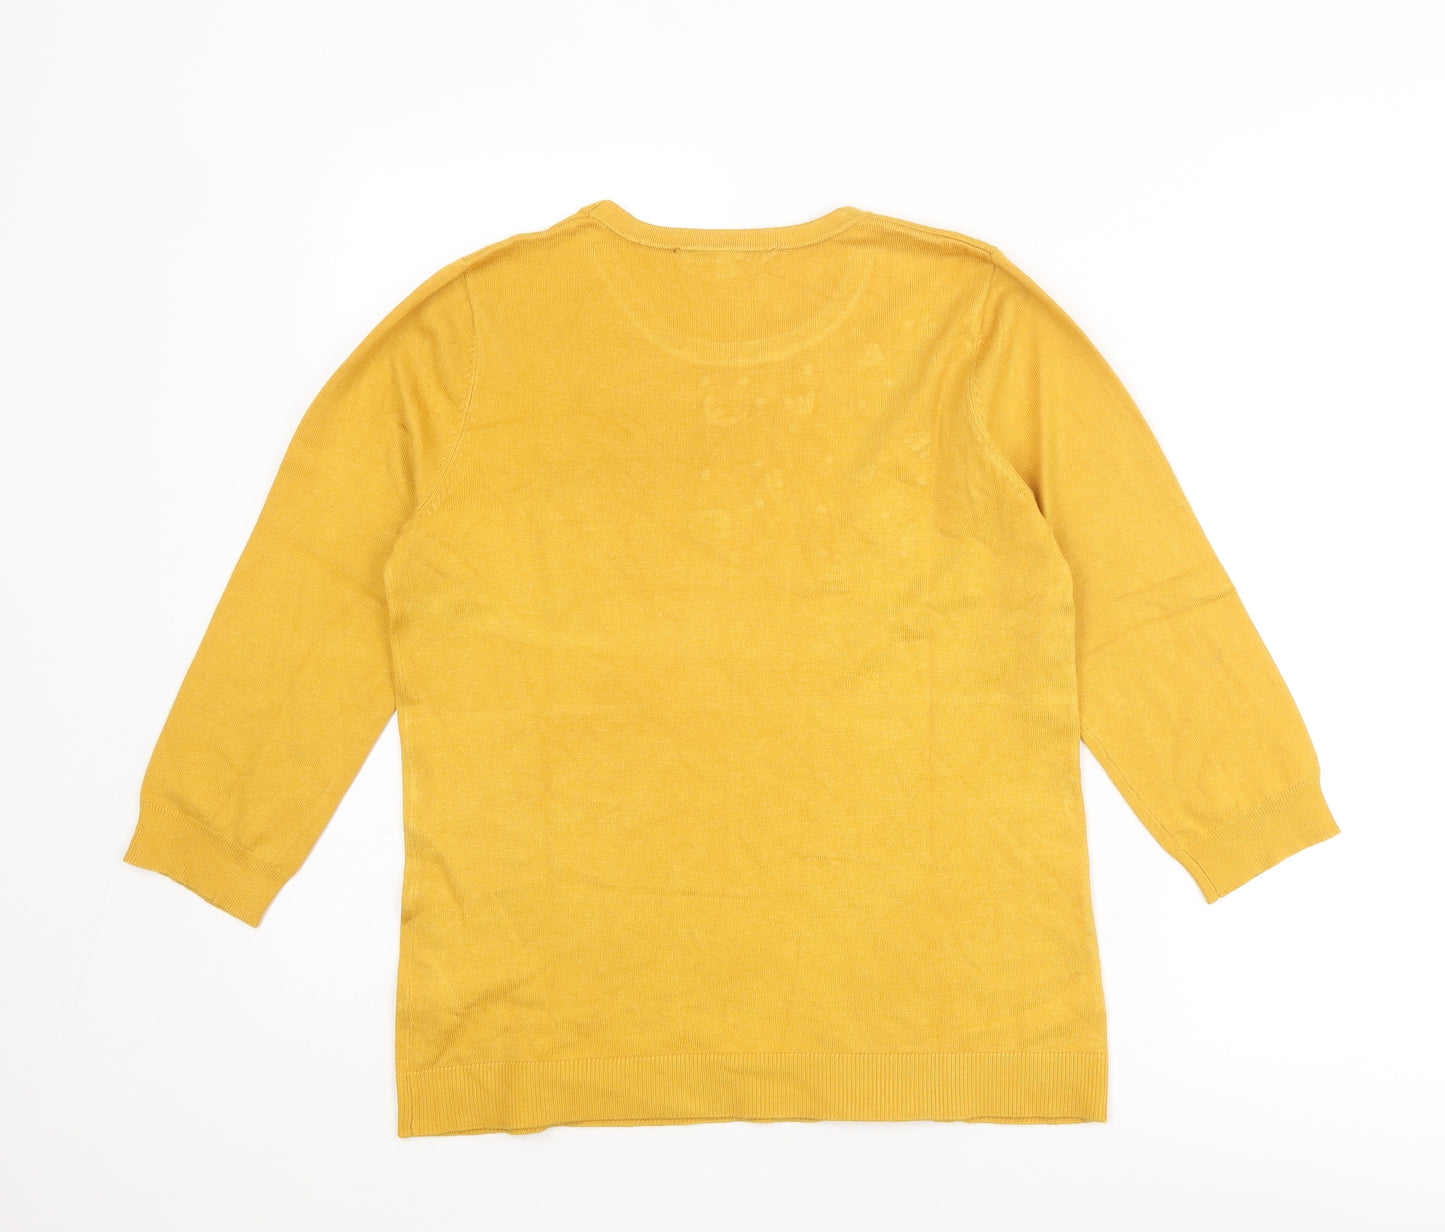 Bonmarché Womens Yellow Round Neck Viscose Pullover Jumper Size 10 - Bee Print